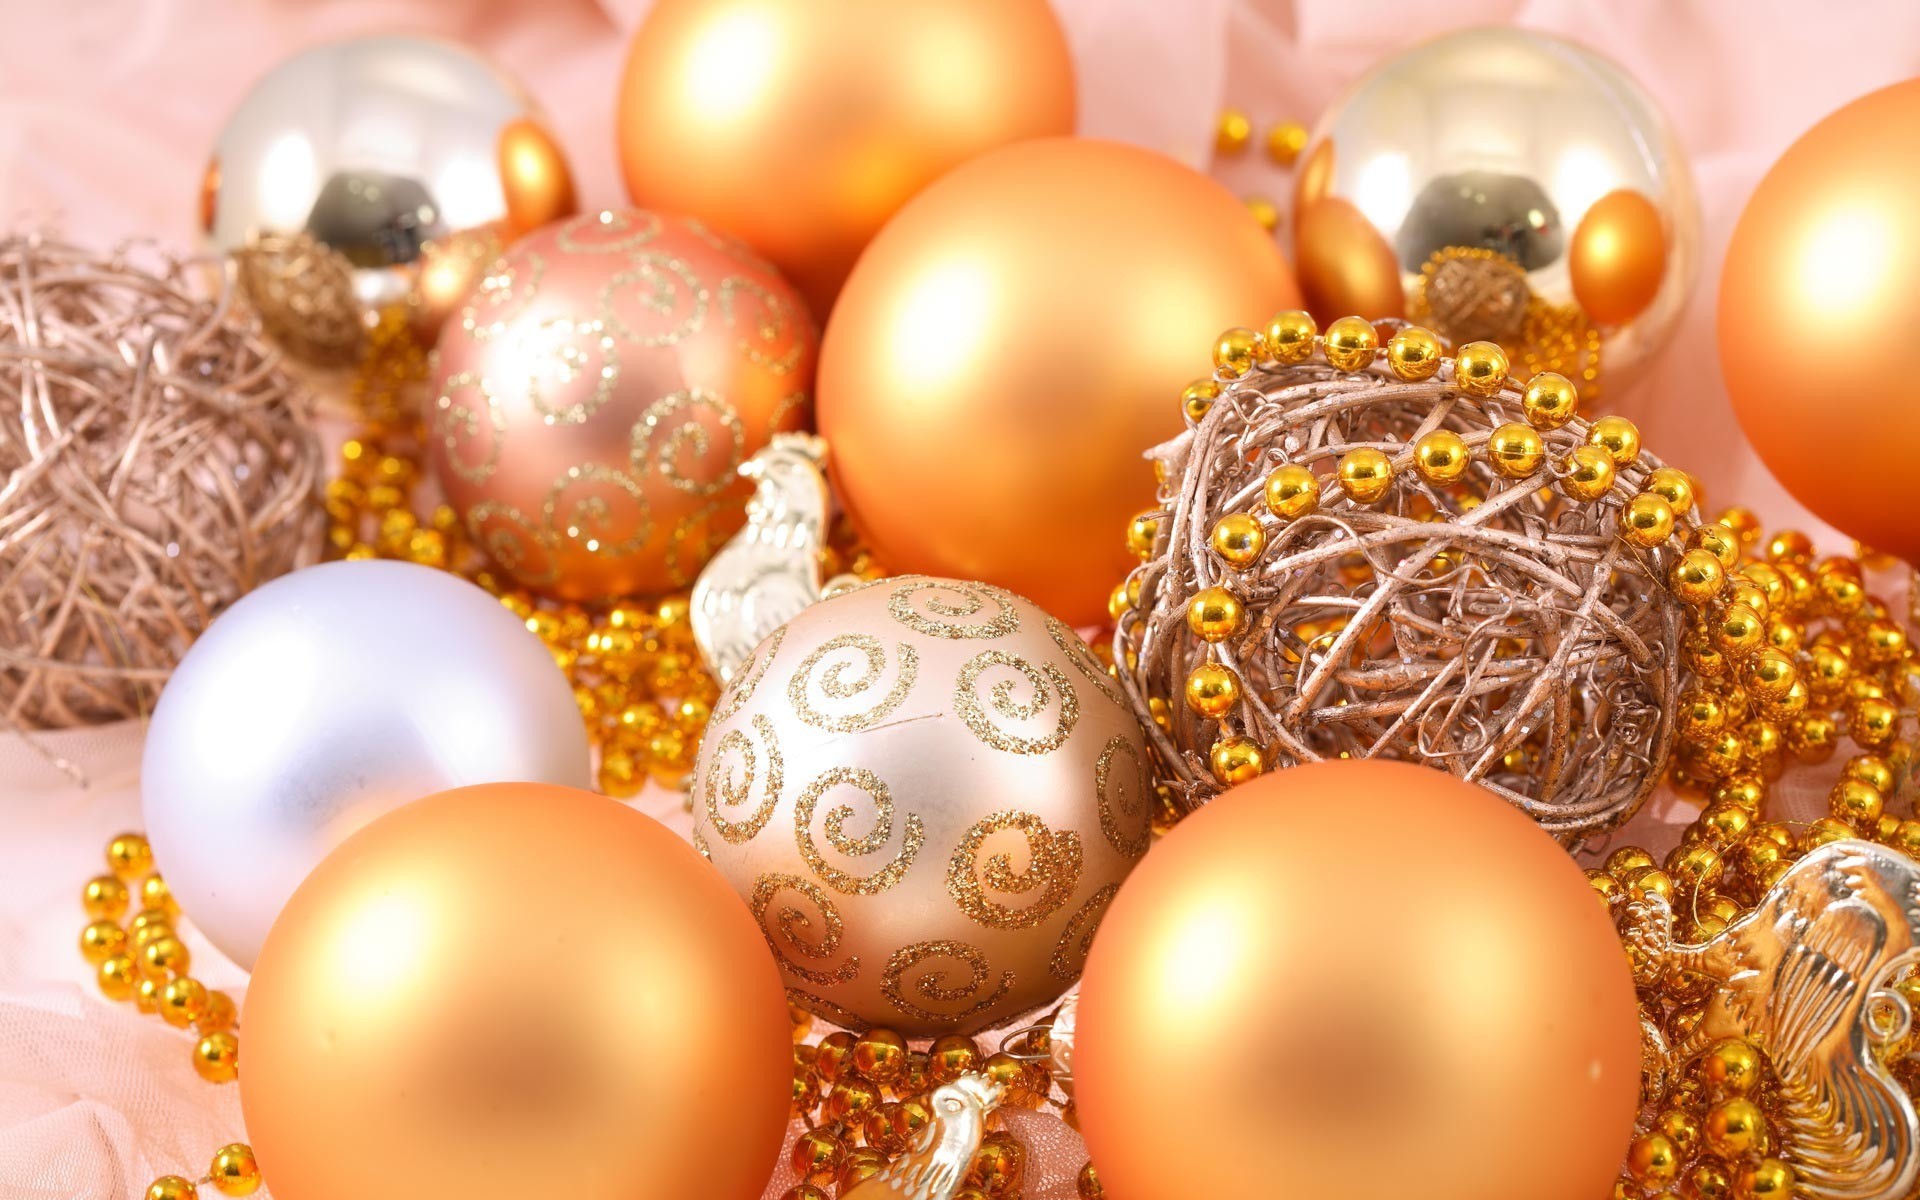 Christmas Ornaments Wallpaper 71 images